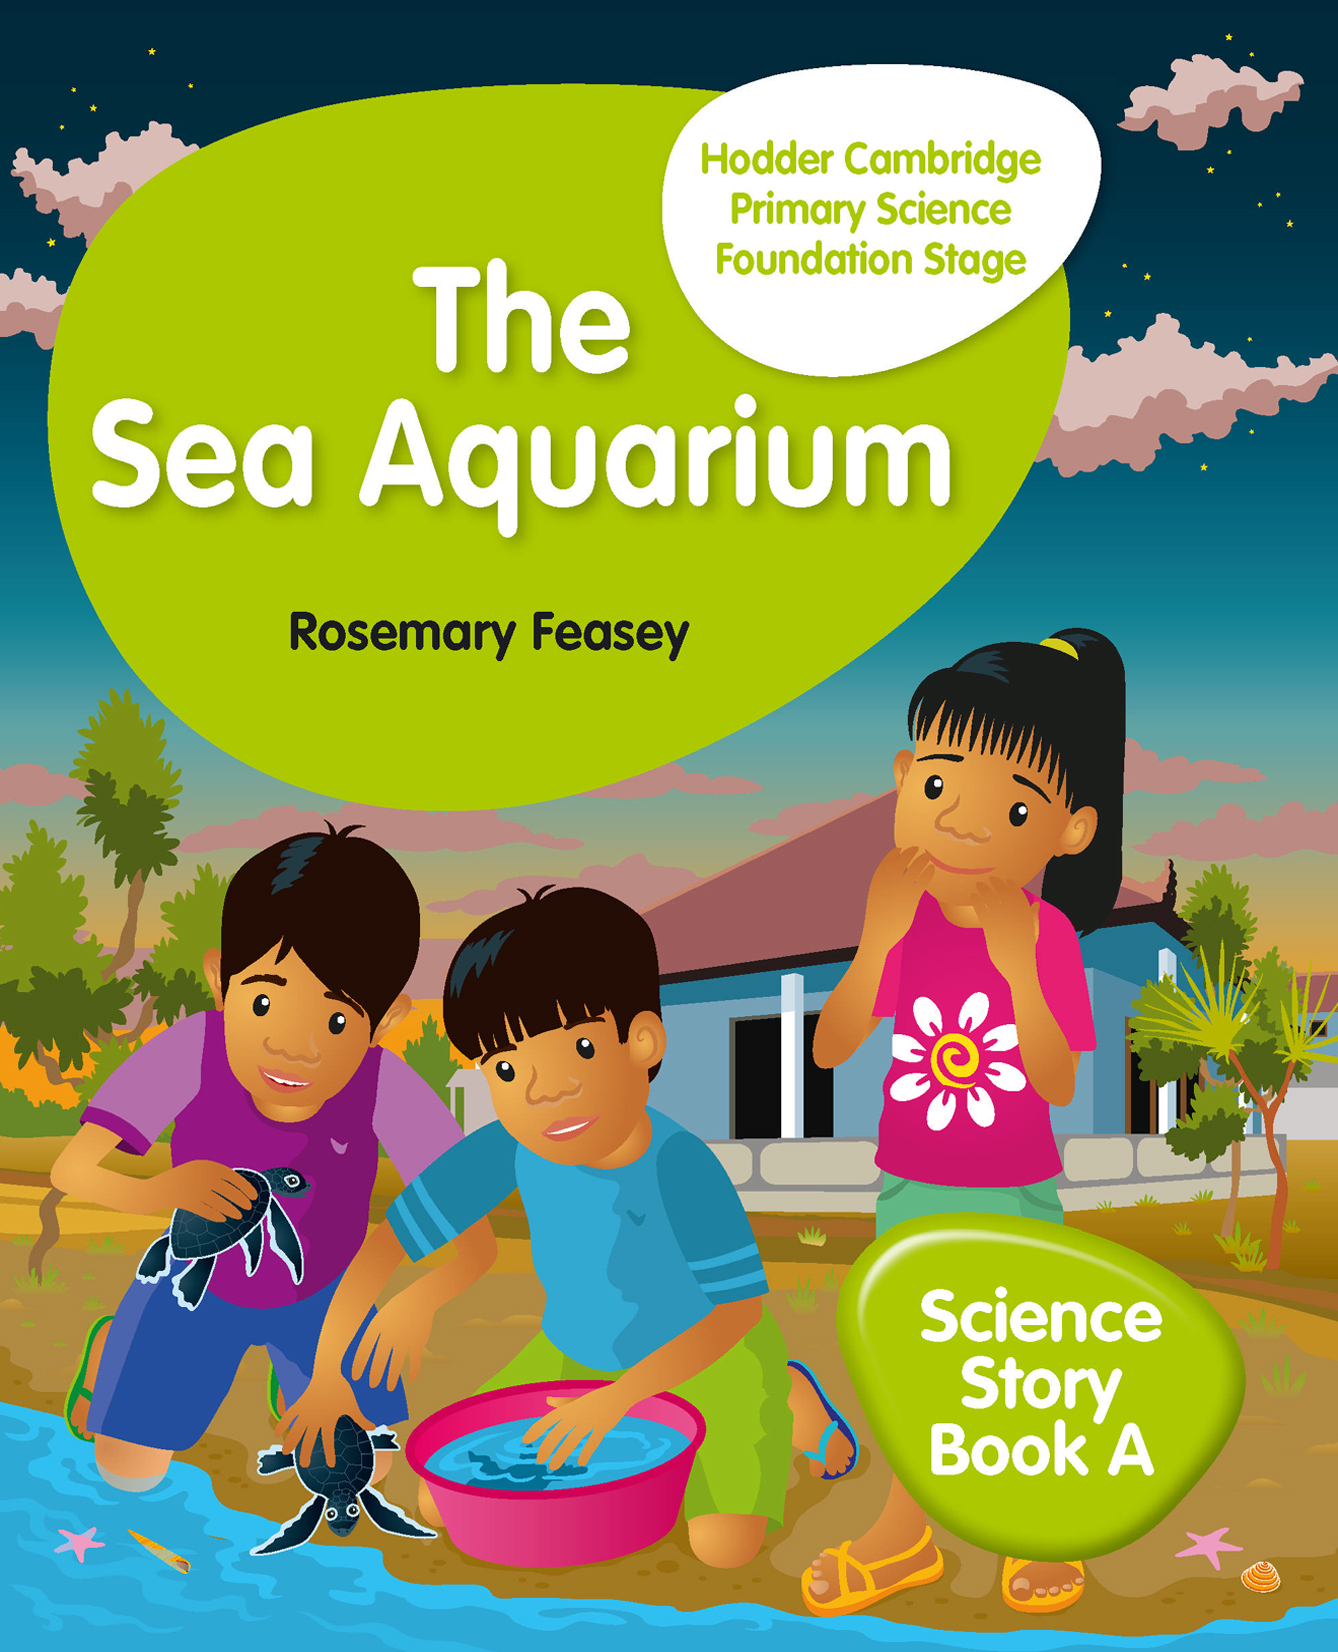 Hodder Cambridge Primary Science Story Book A Foundation Stage The Sea Aquarium